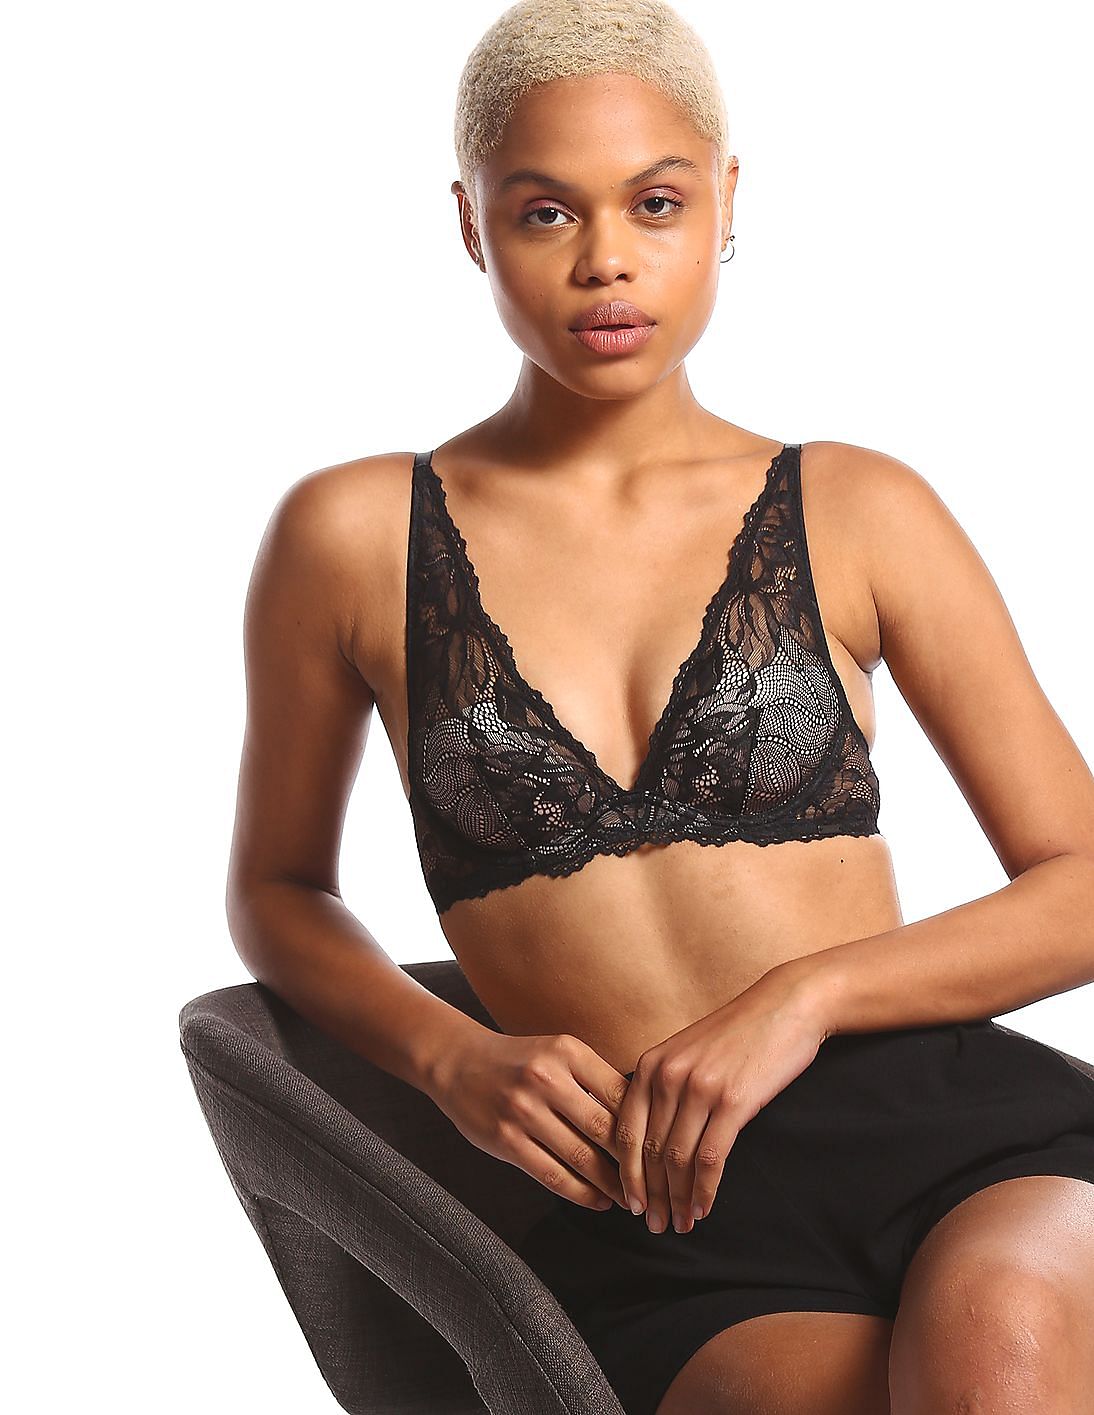 Calvin Klein Padded Bra Black Size M - $8 (73% Off Retail) - From